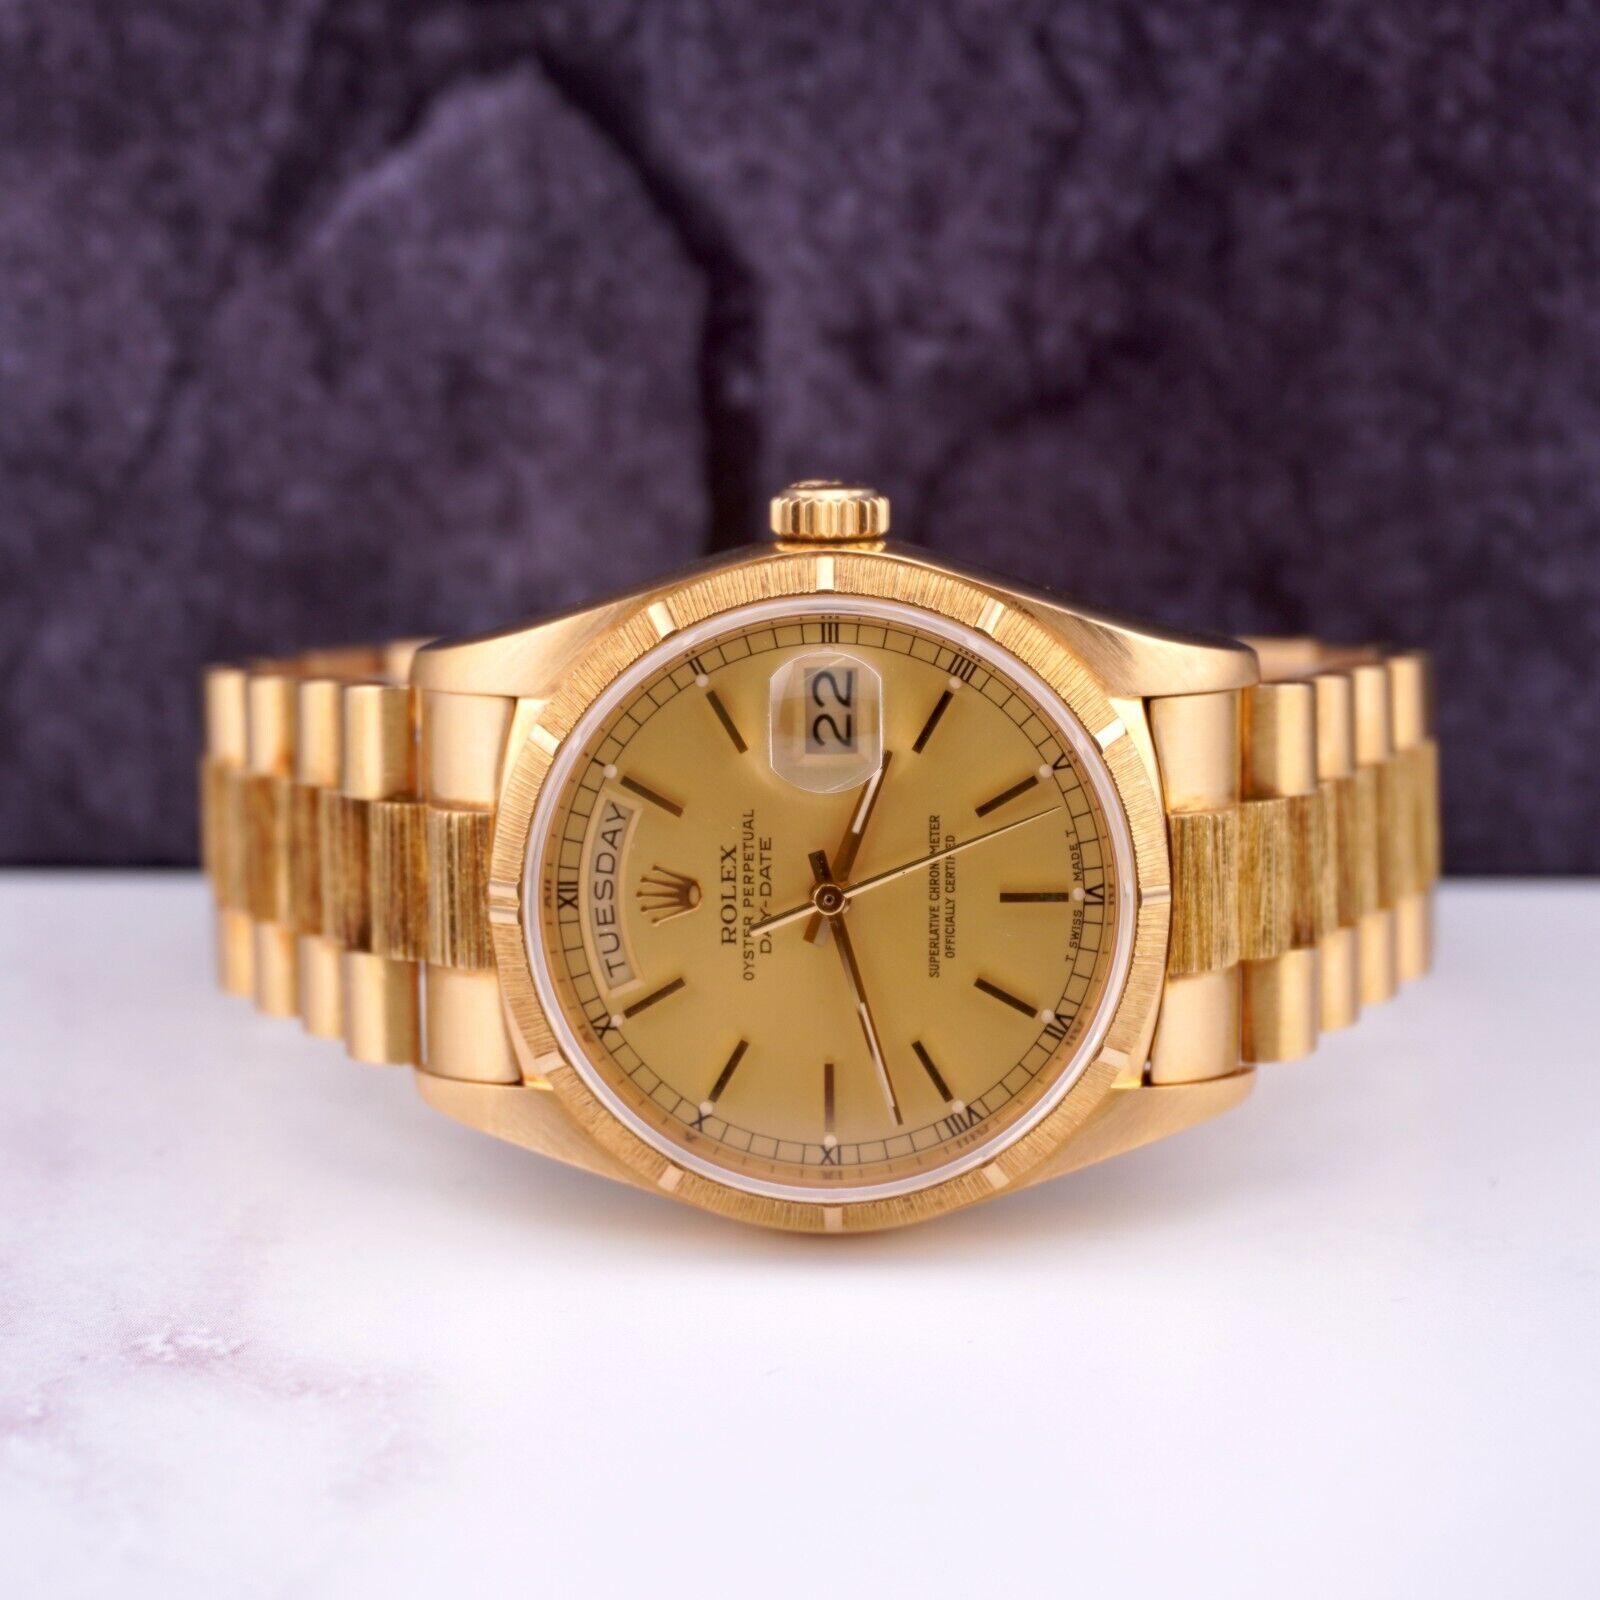 Rolex Day-Date 36mm President Men's Watch. Watch is “ALL ORIGINAL RARE BARK PRESIDENT AND IN GREAT CONDITION!”. A Pre-owned watch w/ Gift Box. Watch is 100% Authentic and Comes with Authenticity Card. Watch Reference is 18078 and is in Excellent